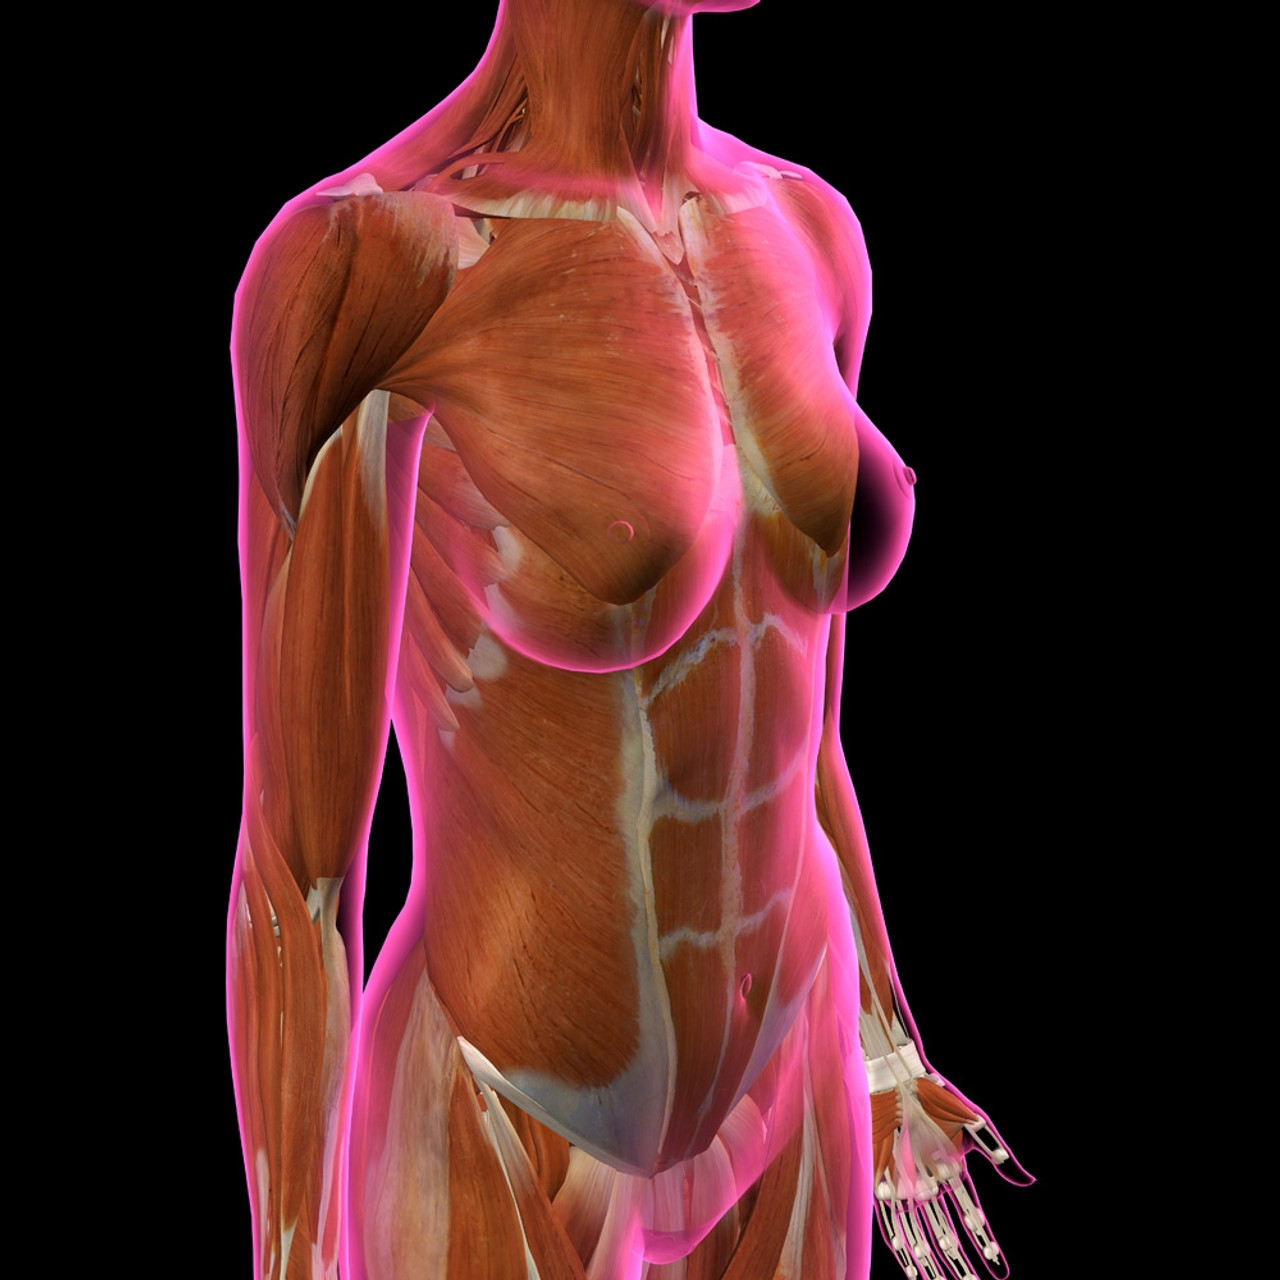 Female chest and abdomen muslces, pink x-ray view. Poster Print by